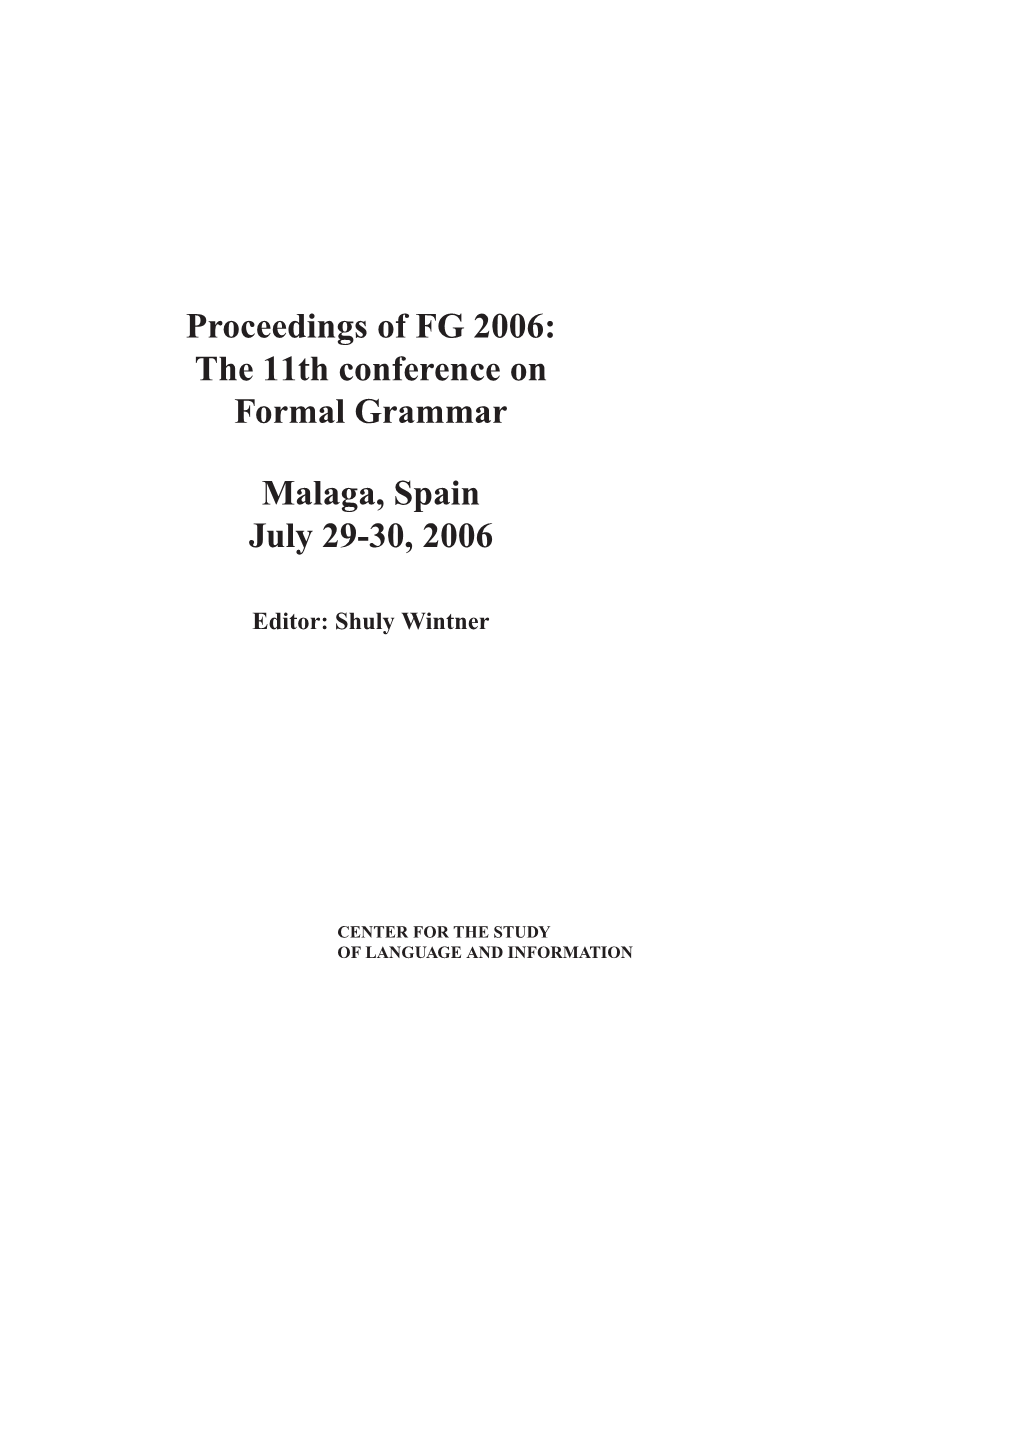 Proceedings of FG 2006: the 11Th Conference on Formal Grammar